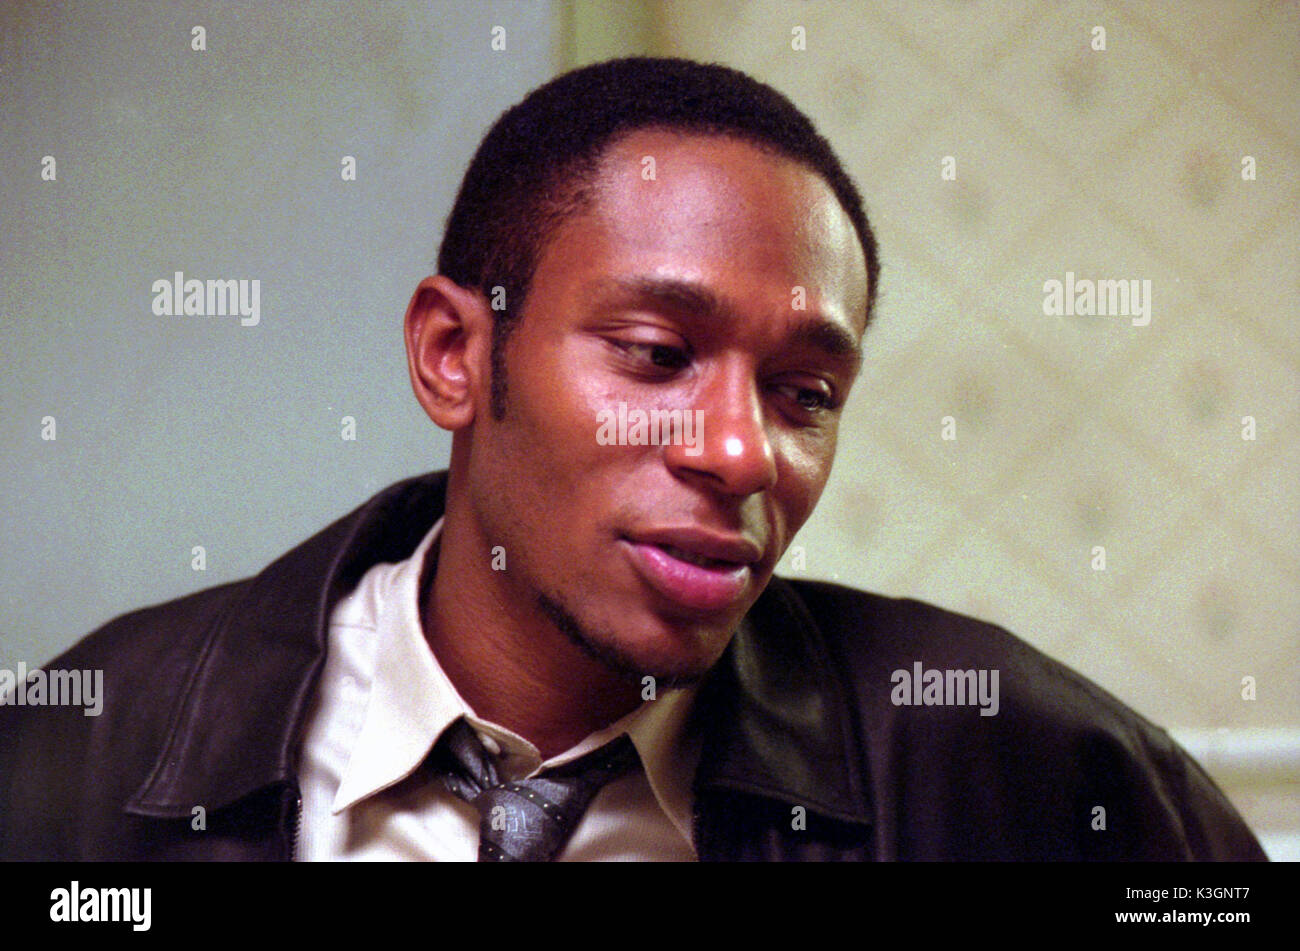 Mos Def getting into a limousine with his family after arriving at LAX  airport Los Angeles, California - 29.10.09 Stock Photo - Alamy